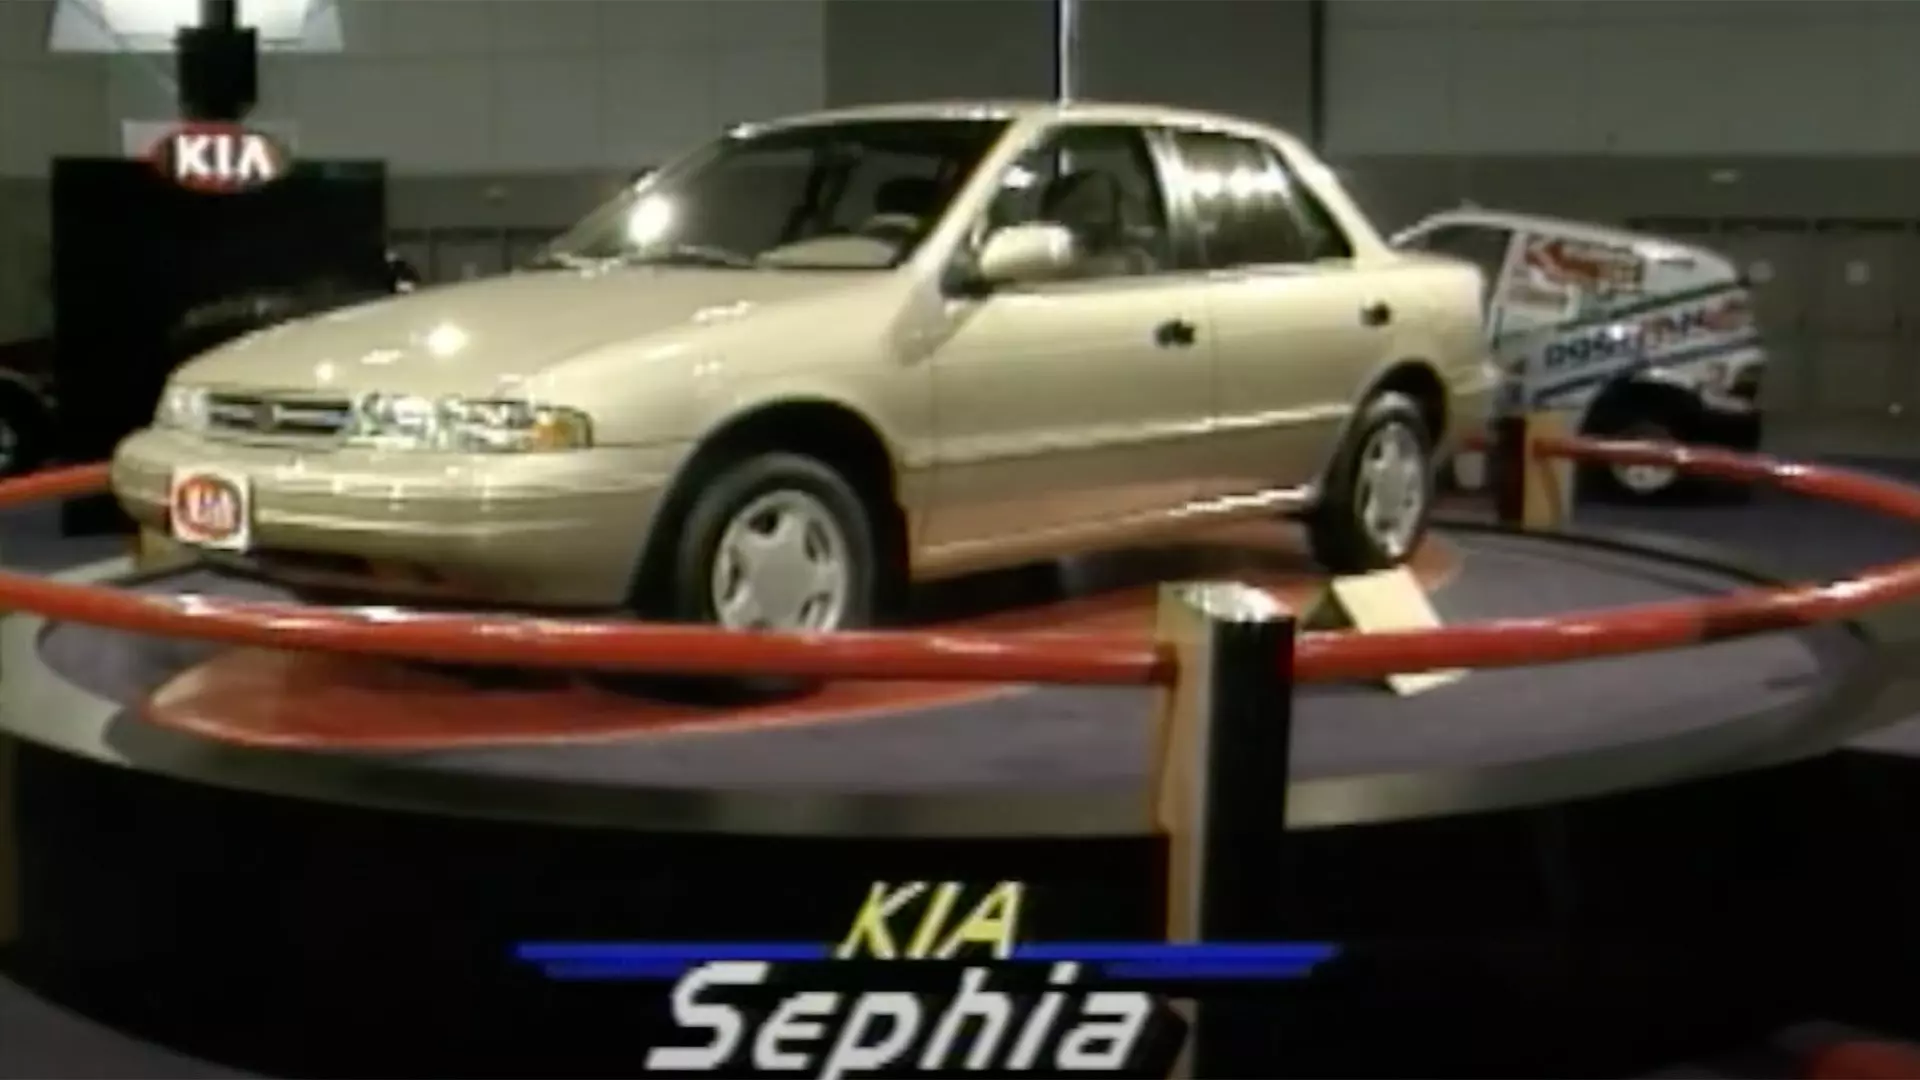 LA Auto Show Footage From ’94 Is a Great Illustration of How Far Kia Has Come | Autance